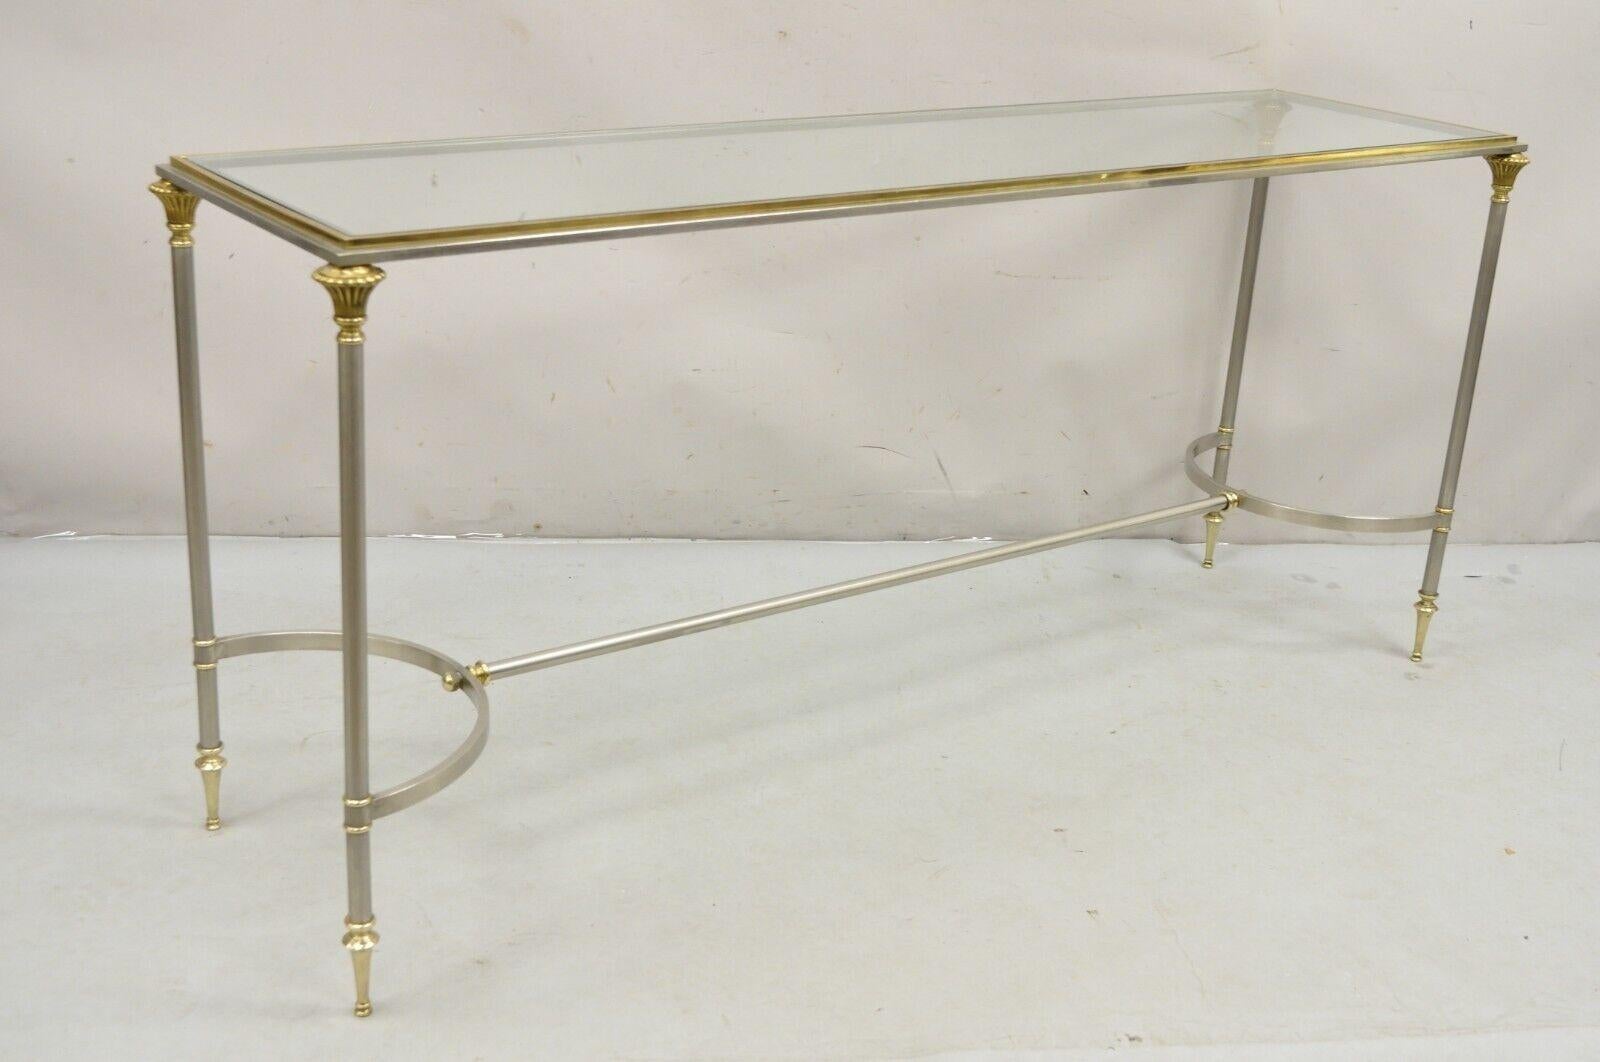 Vintage Italian Maison Jansen Style Steel and Brass Neoclassical Directoire Console Table. Item features Inset glass top, steel and brass frame, clean lines, very nice Italian table. Circa 1970s. Measurements: 27.25